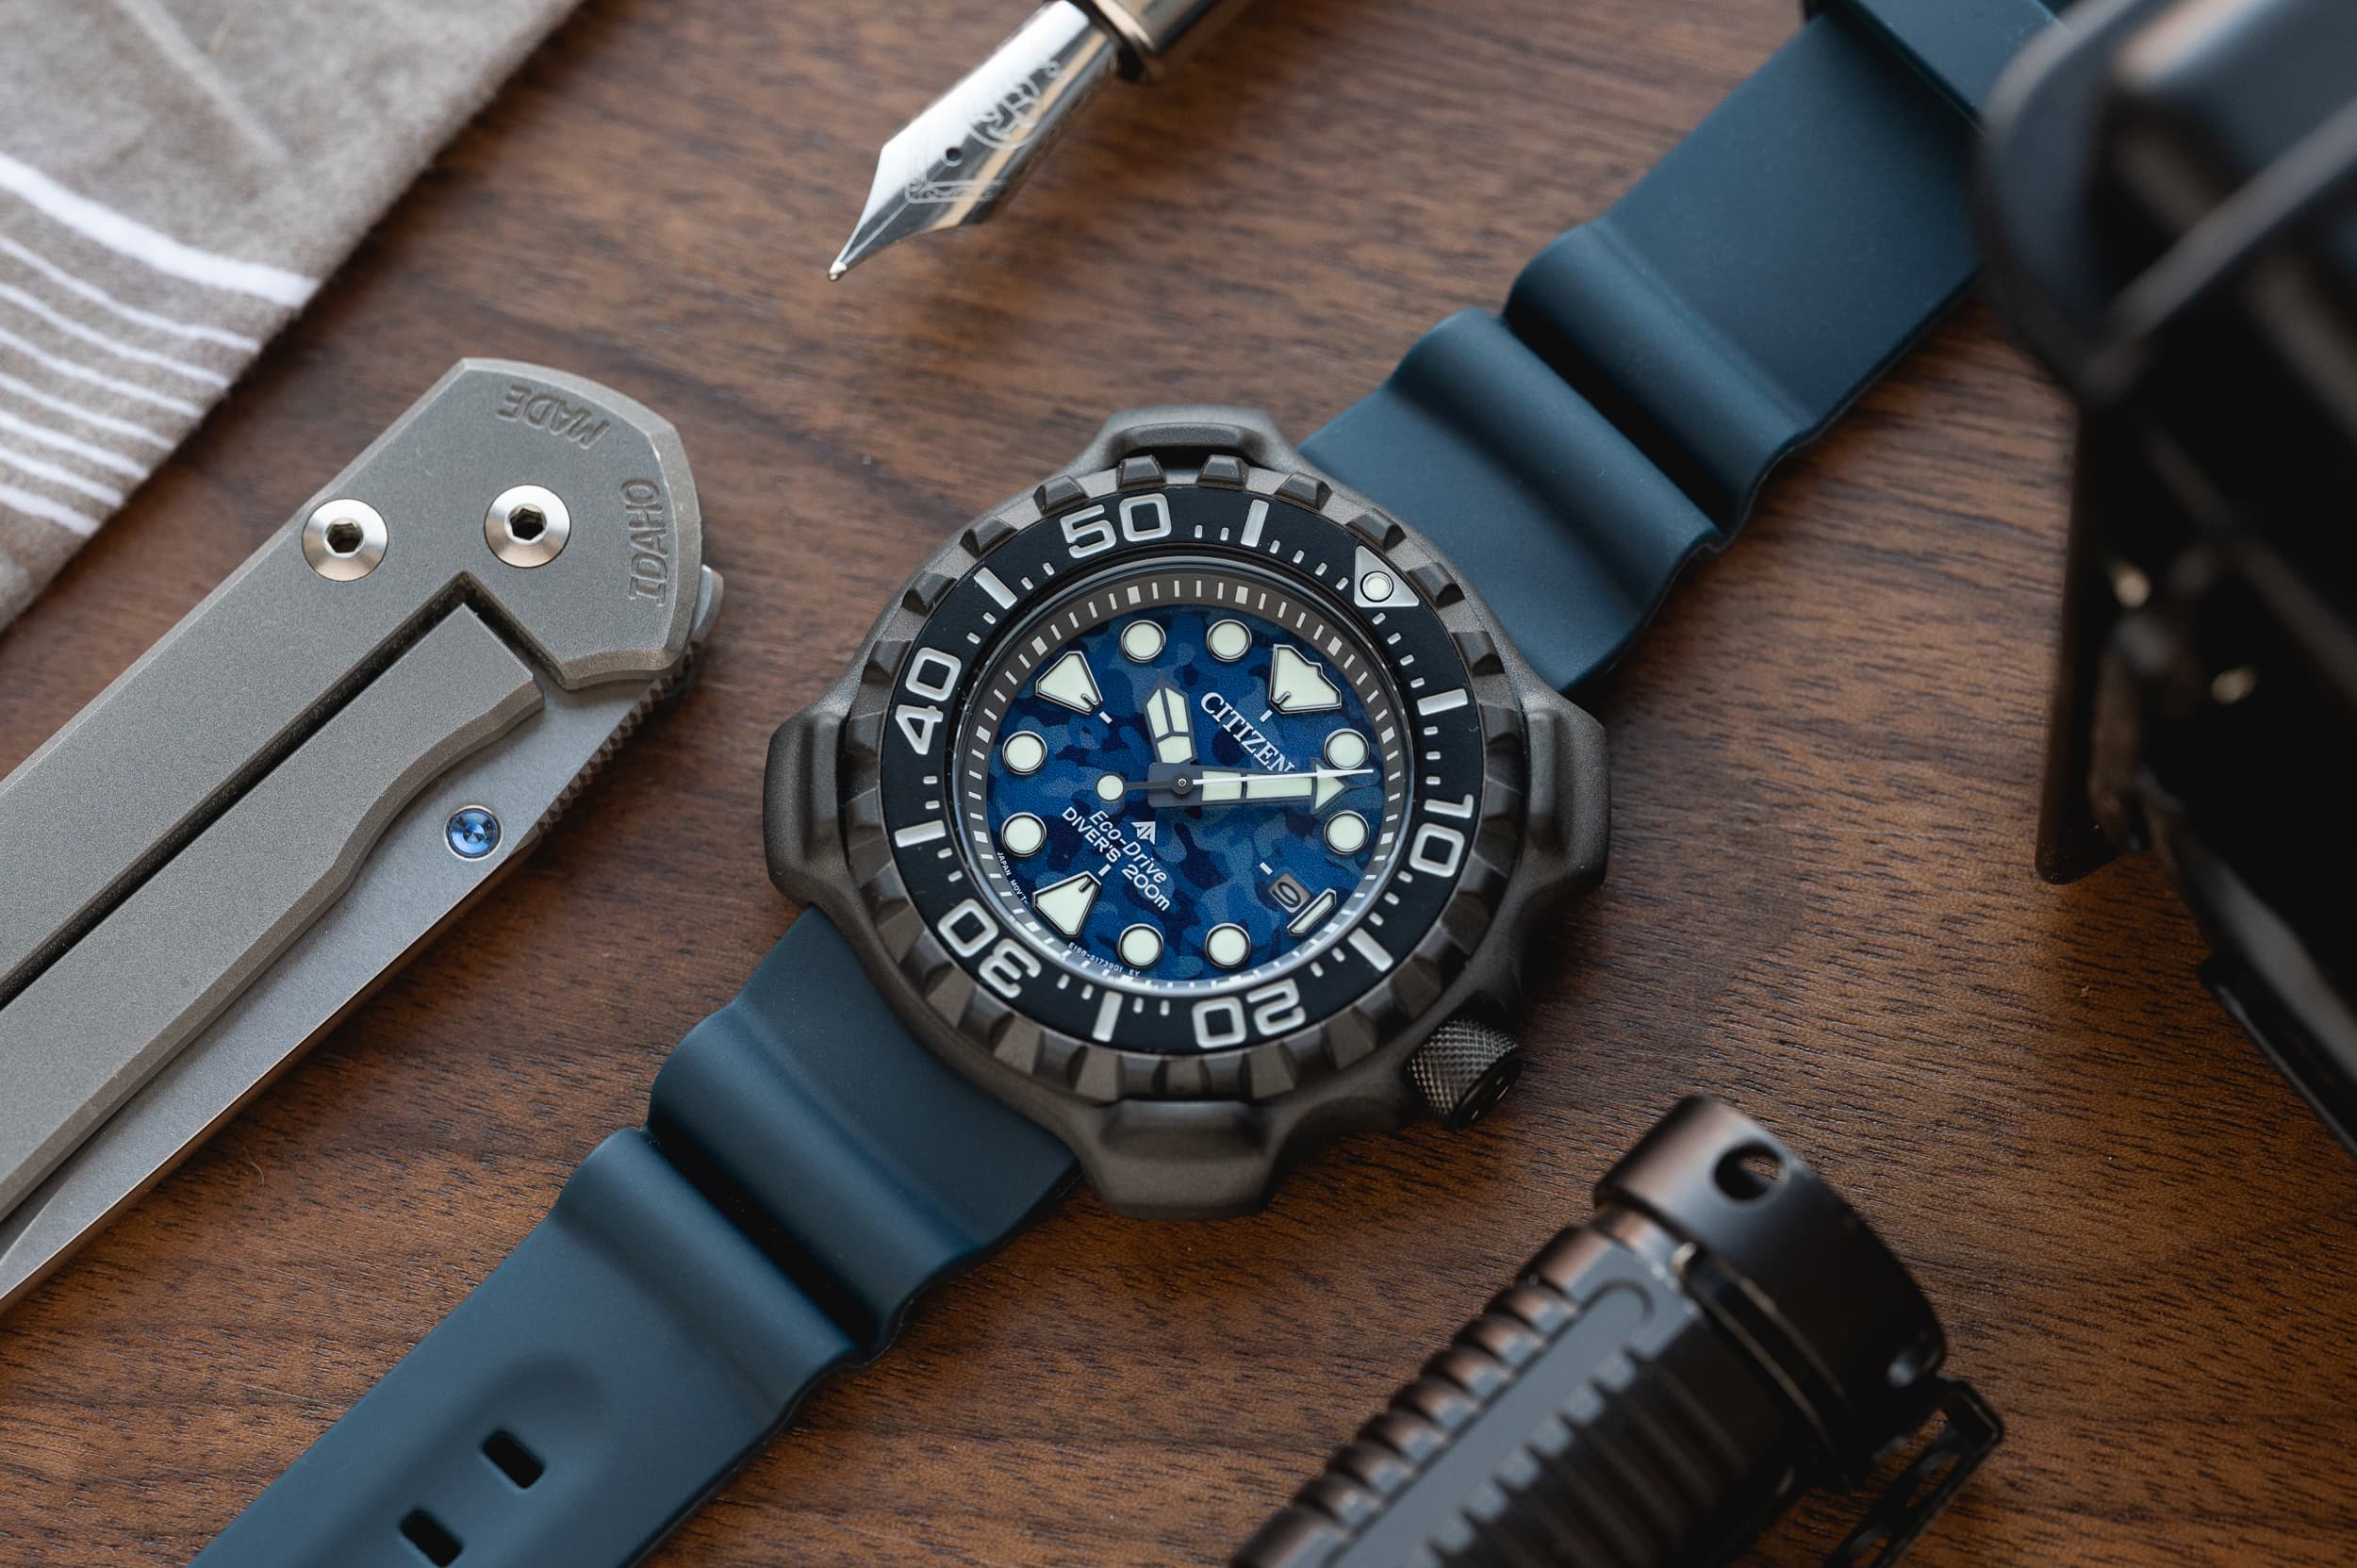 Approachable & Review: Wound Citizen The Diver Worn Promaster BN0227-09L Assertive - Yet